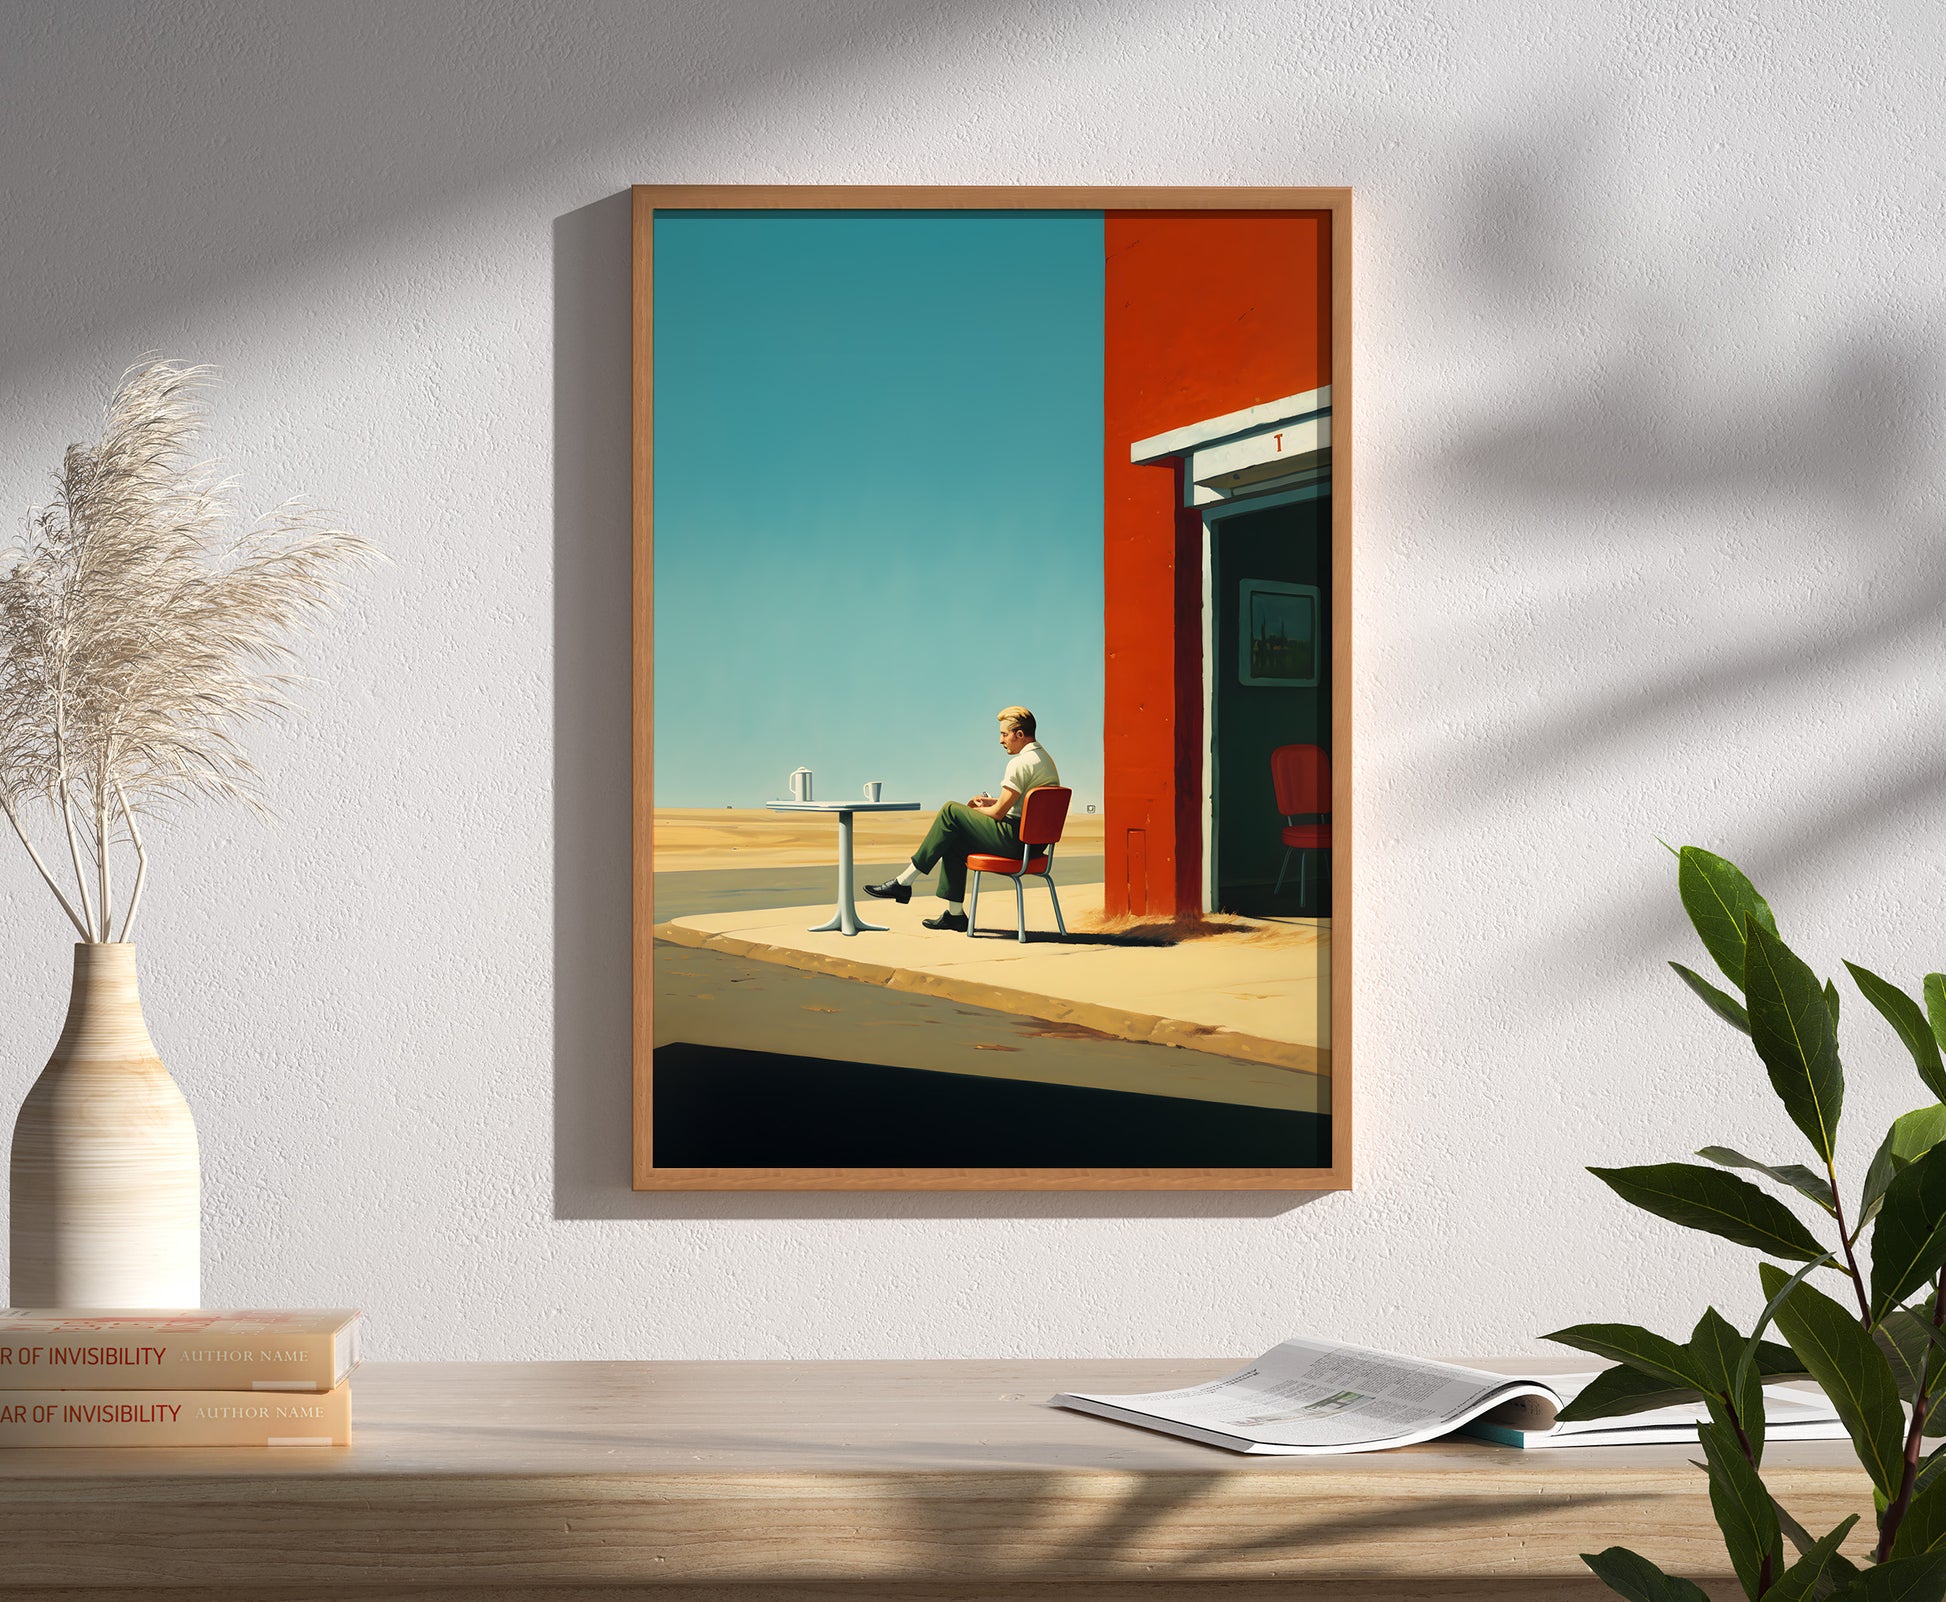 A framed painting on a wall depicting a person sitting outside in the sunlight.